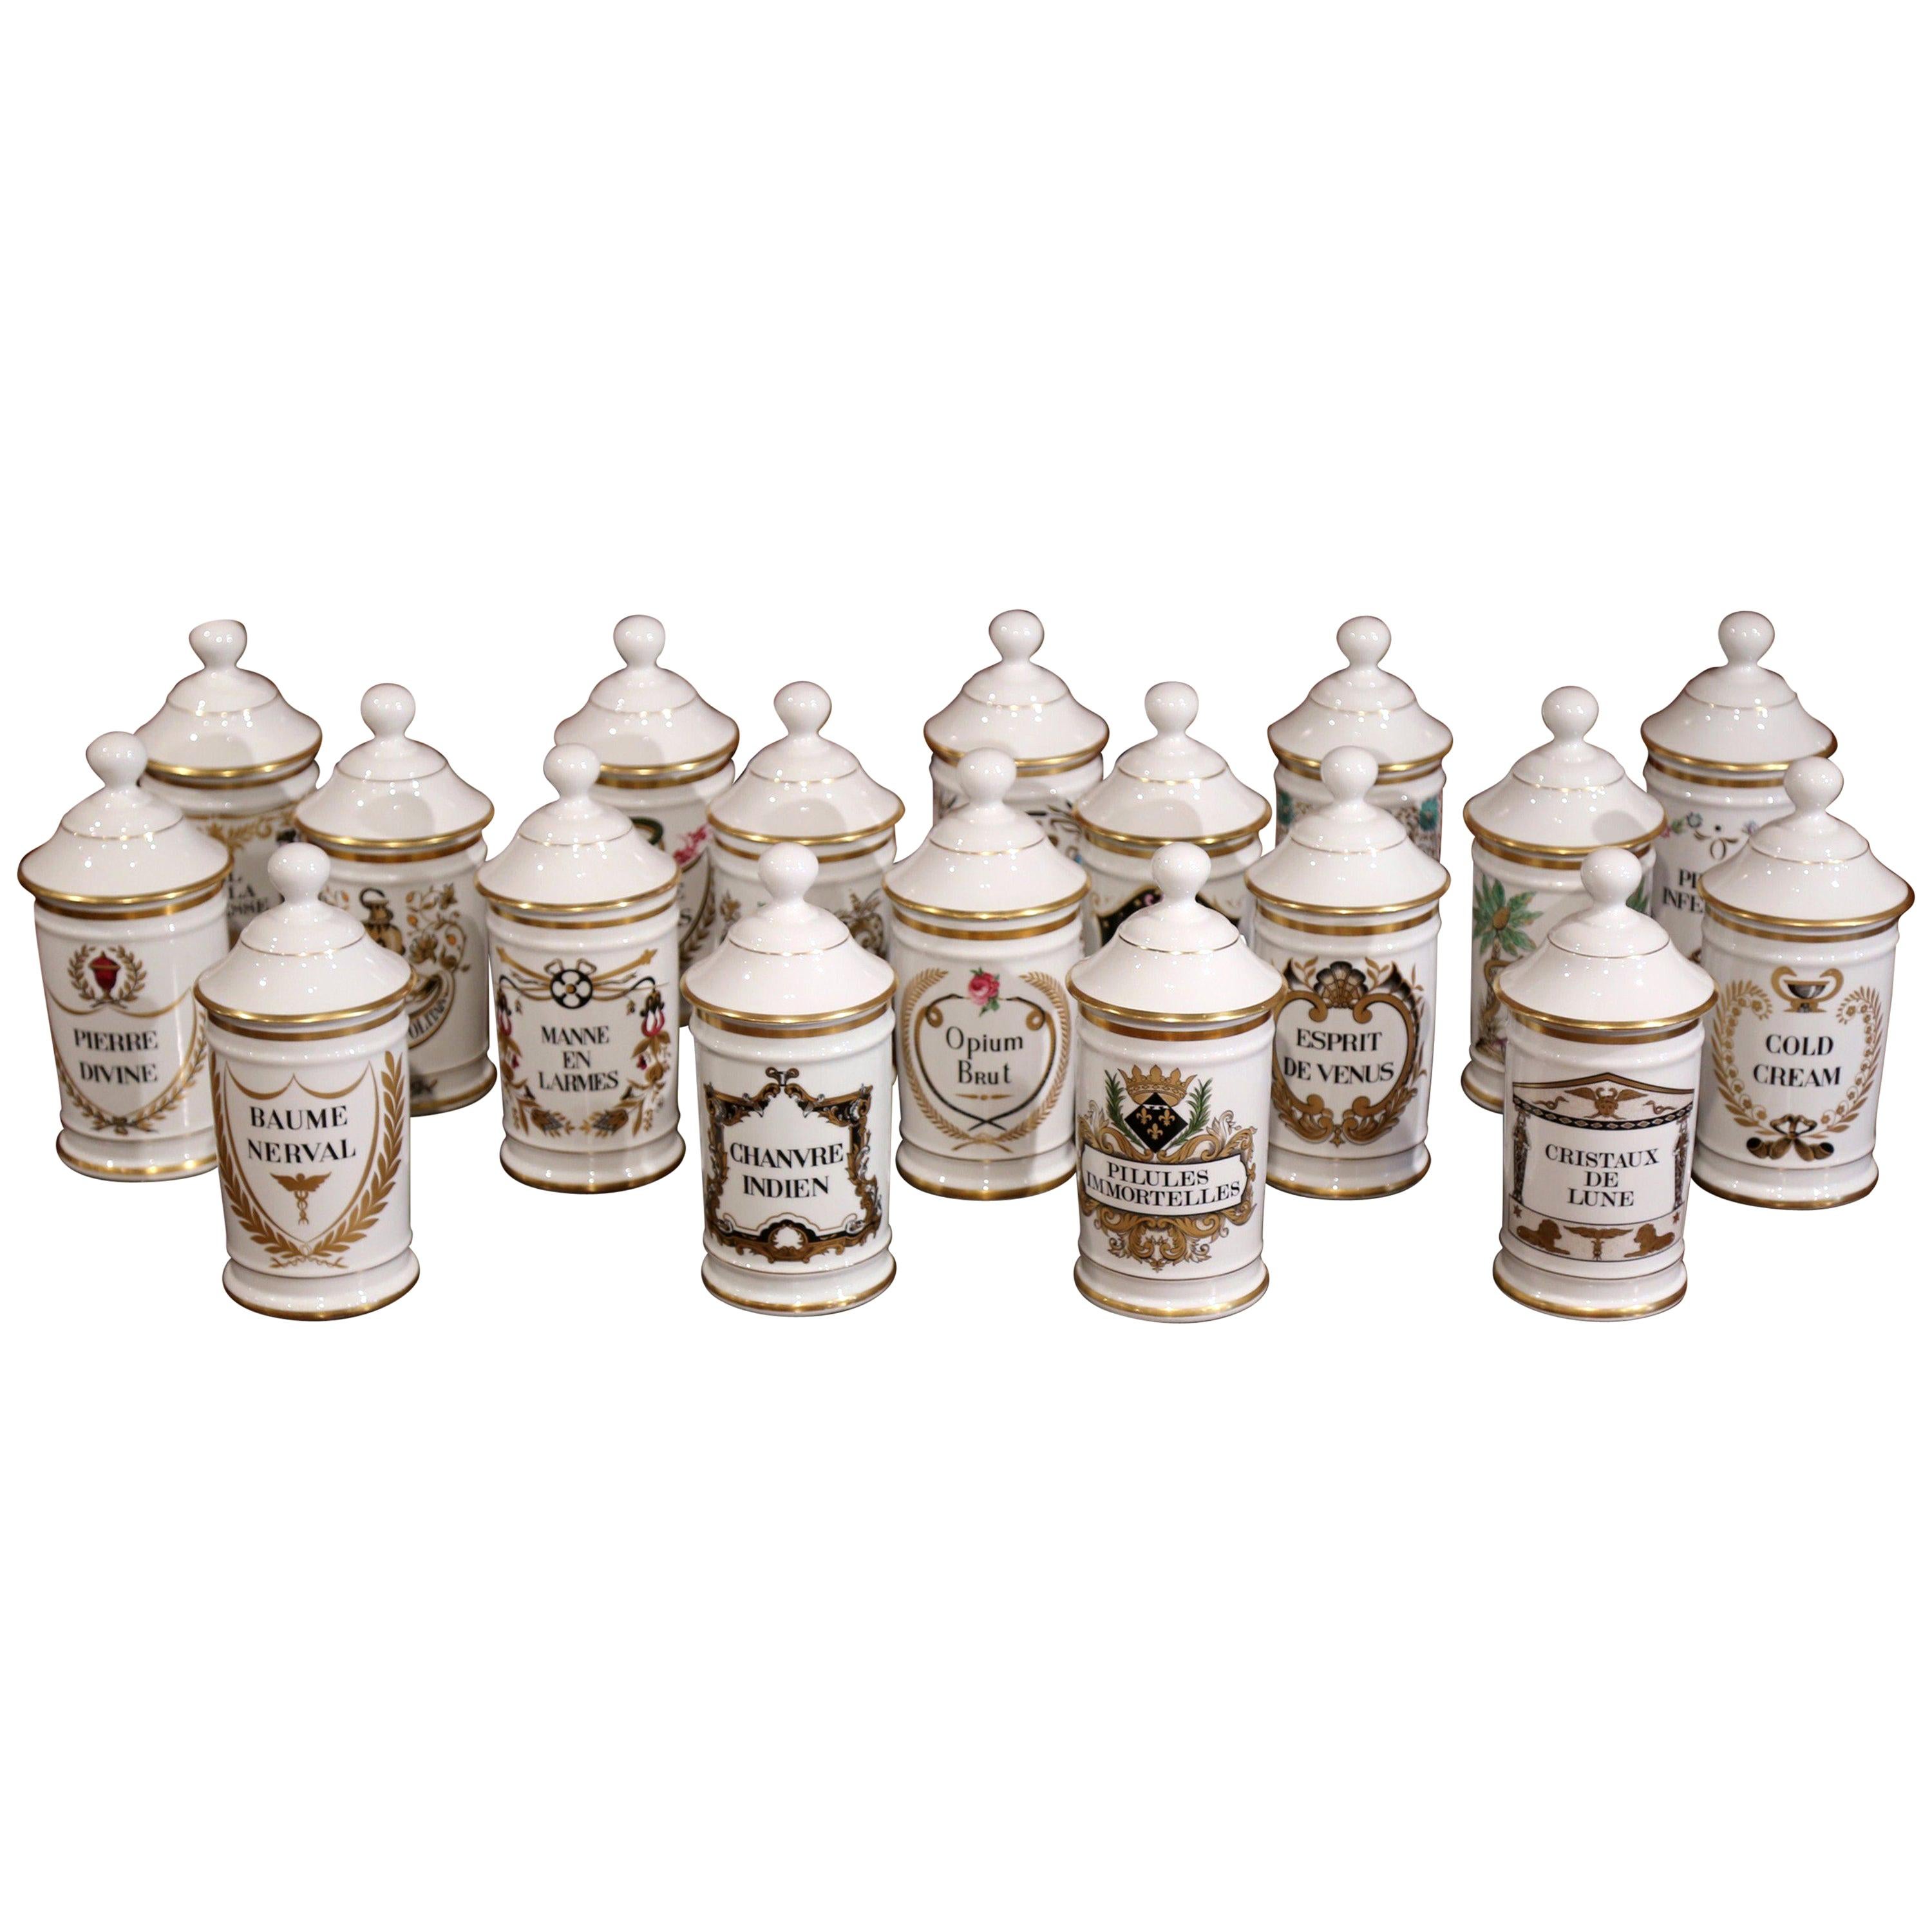 Mid-20th Century French Apothecary or Pharmacy Pots from Limoges, Set of 18